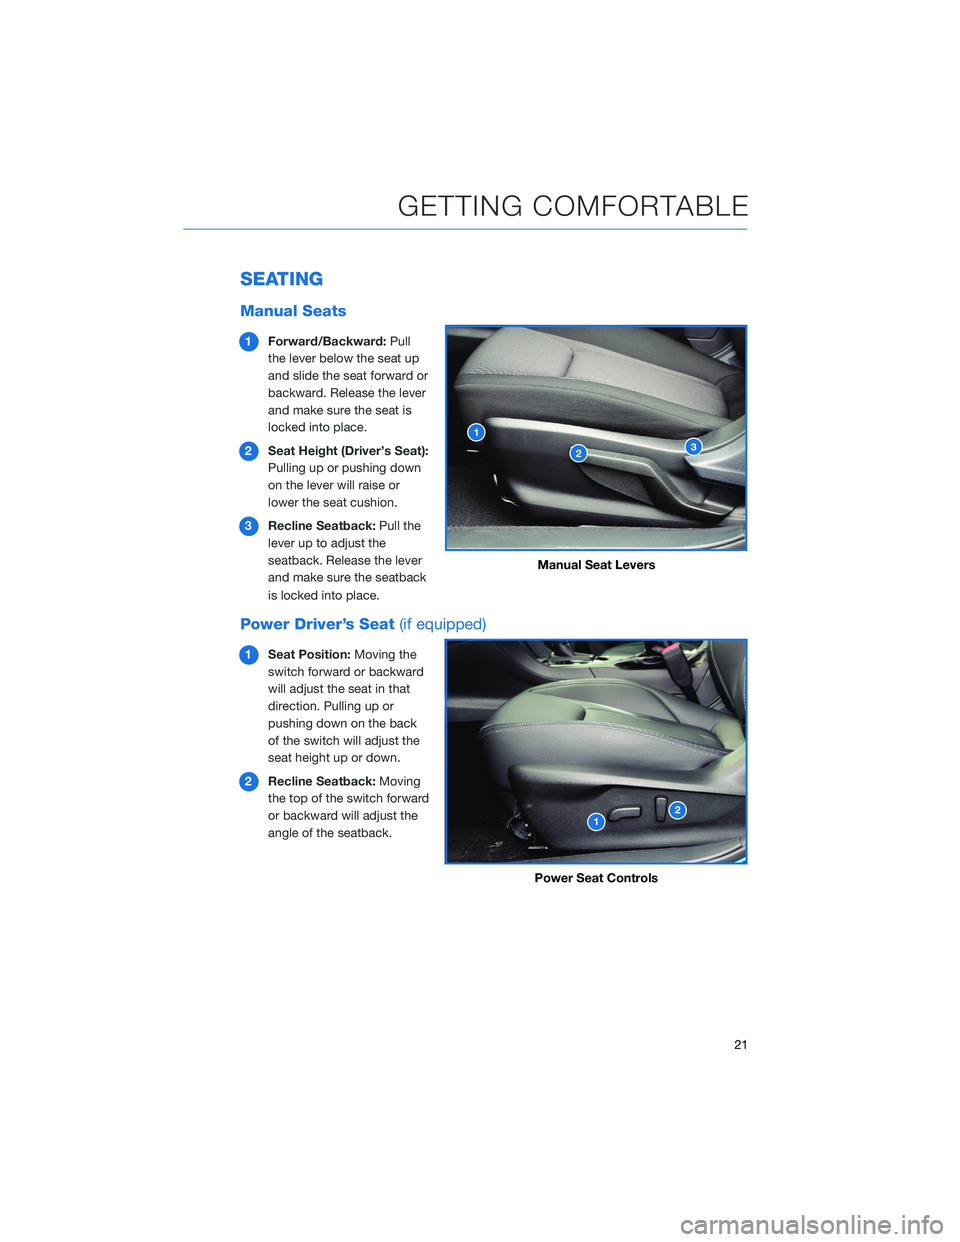 SUBARU CROSSTREK 2022  Getting Started Guide SEATING
Manual Seats
1Forward/Backward:Pull
the lever below the seat up
and slide the seat forward or
backward. Release the lever
and make sure the seat is
locked into place.
2Seat Height (Driver’s 